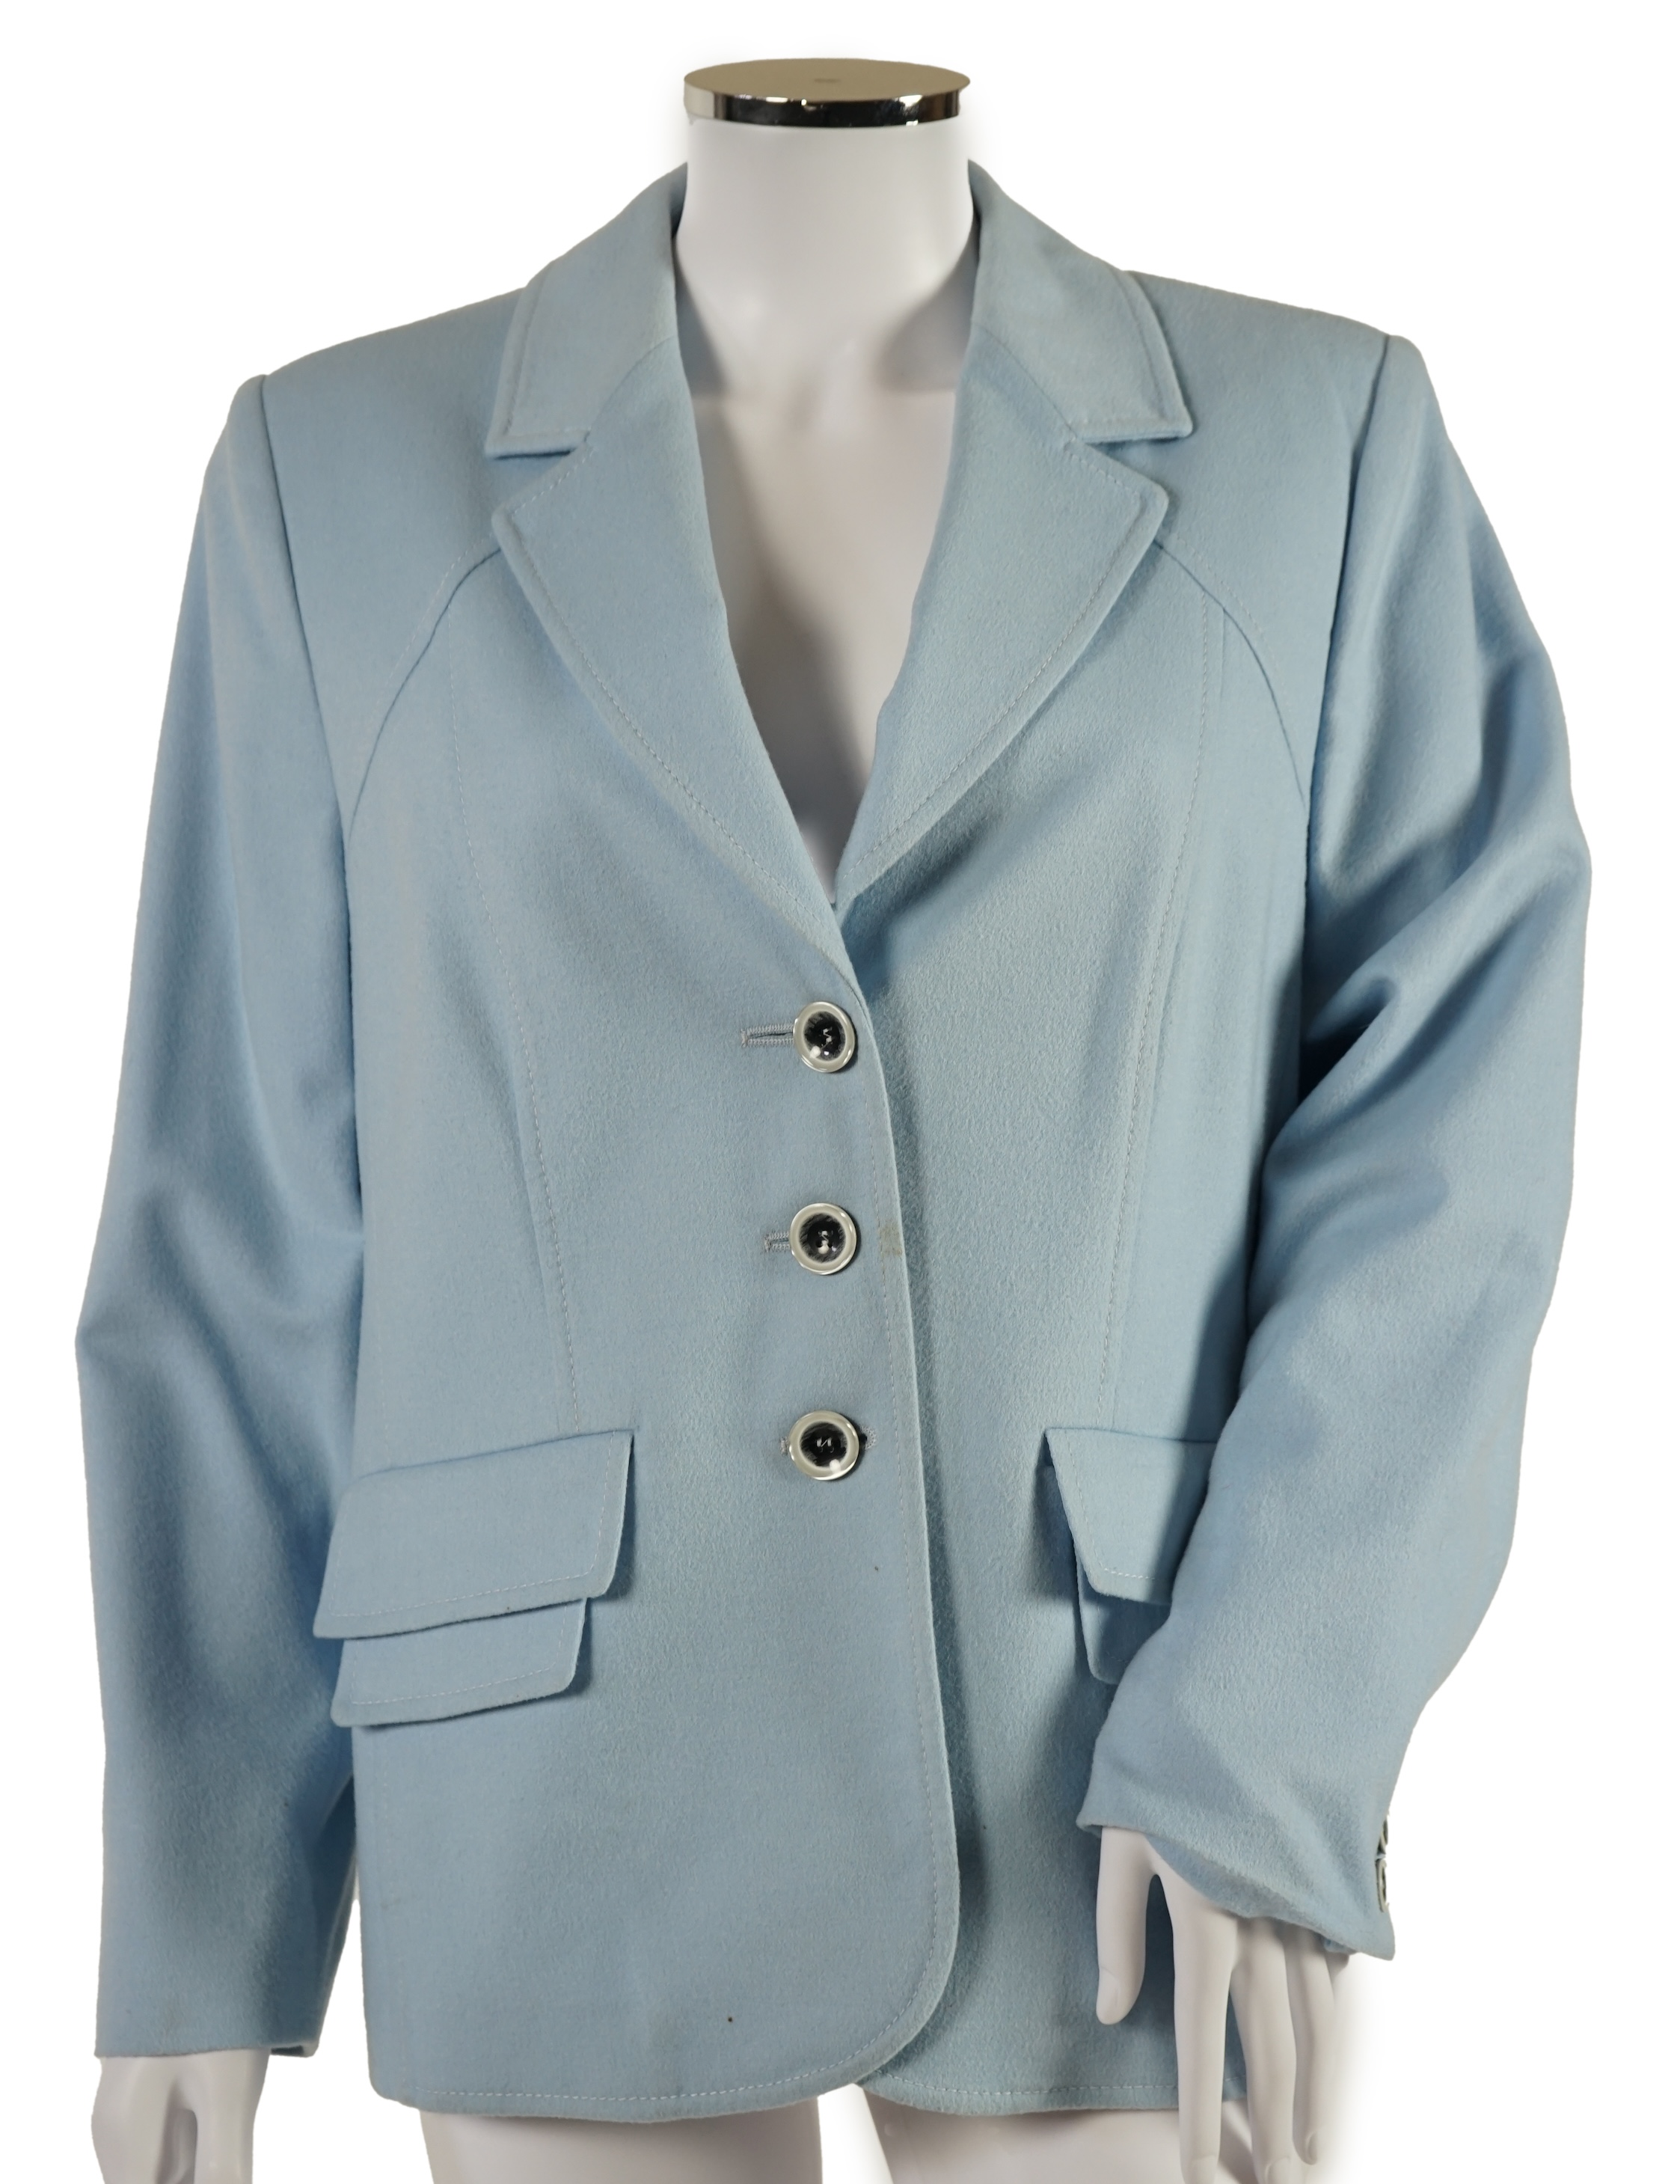 Four Avantgarde lady's clothes: a gilet, jacket and co-ordinating blouse and light blue blazer. Sizes 14-16 Proceeds to Happy Paws Puppy Rescue